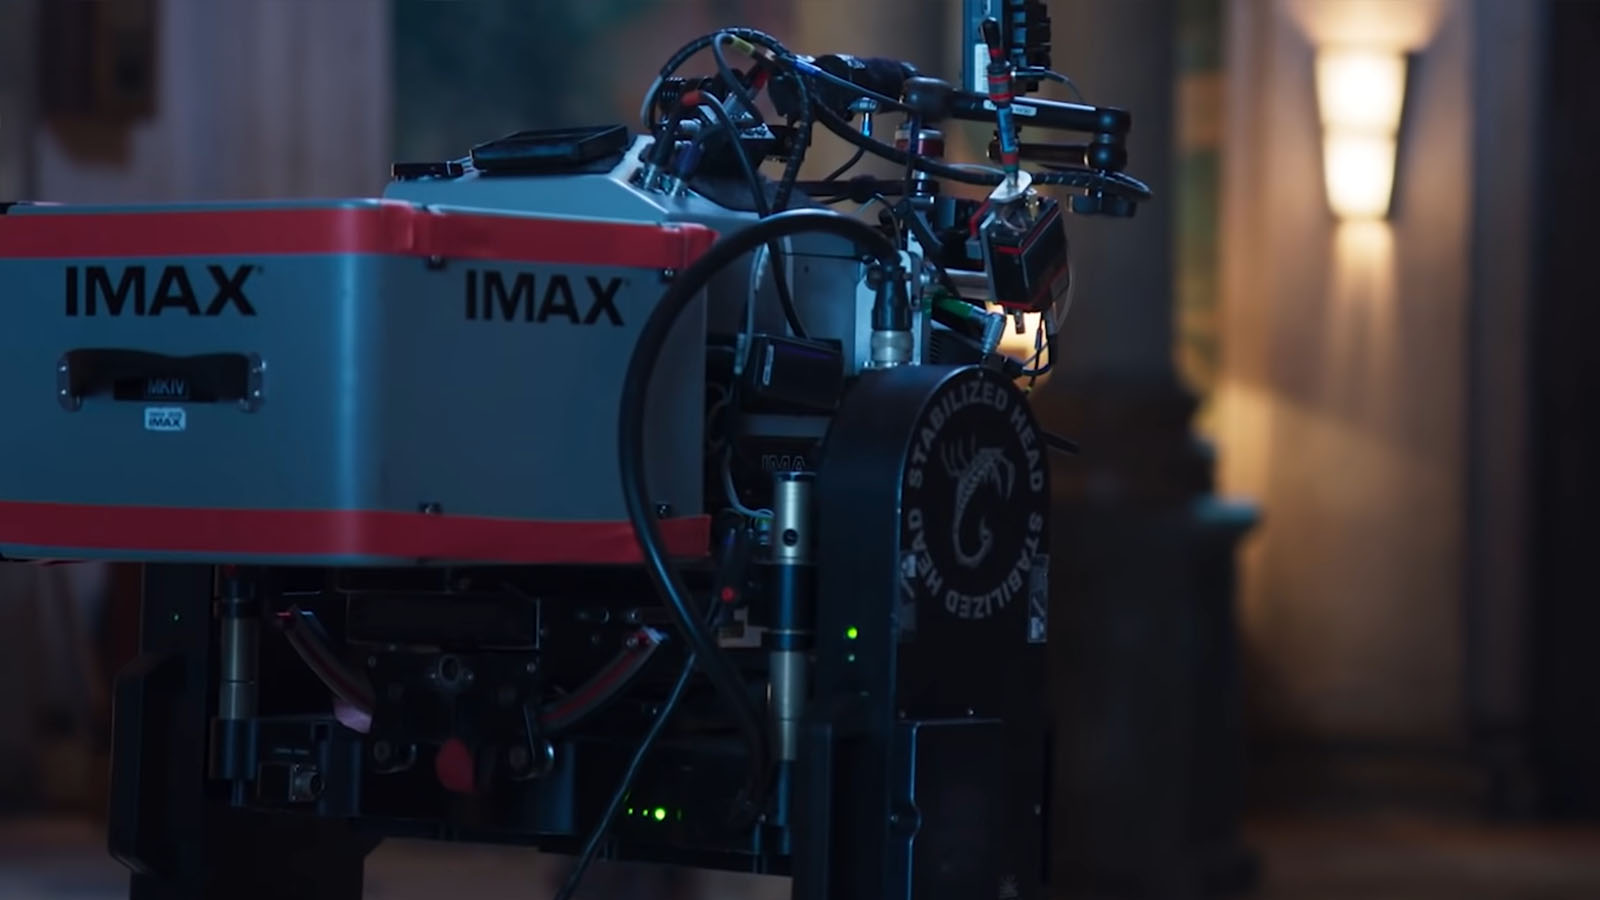 Up close with the IMAX 70mm camera rig on the set of No Time to Die.